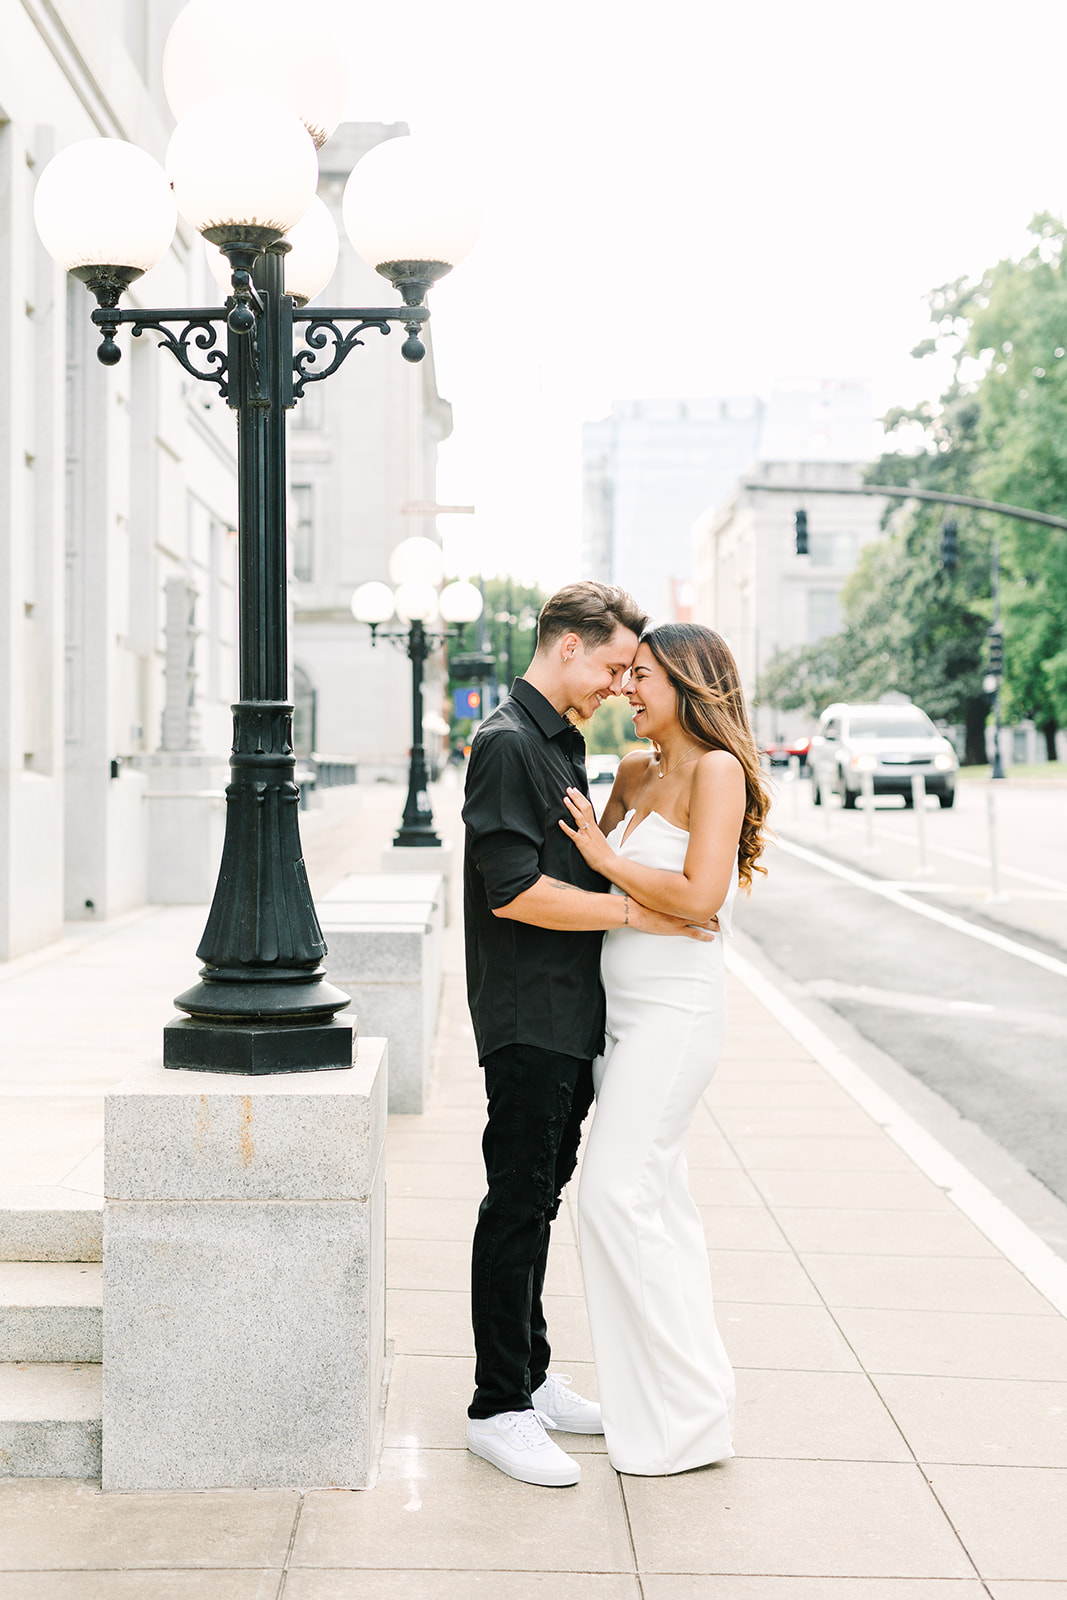 Modern downtown city engagement session in Raleigh, North Carolina